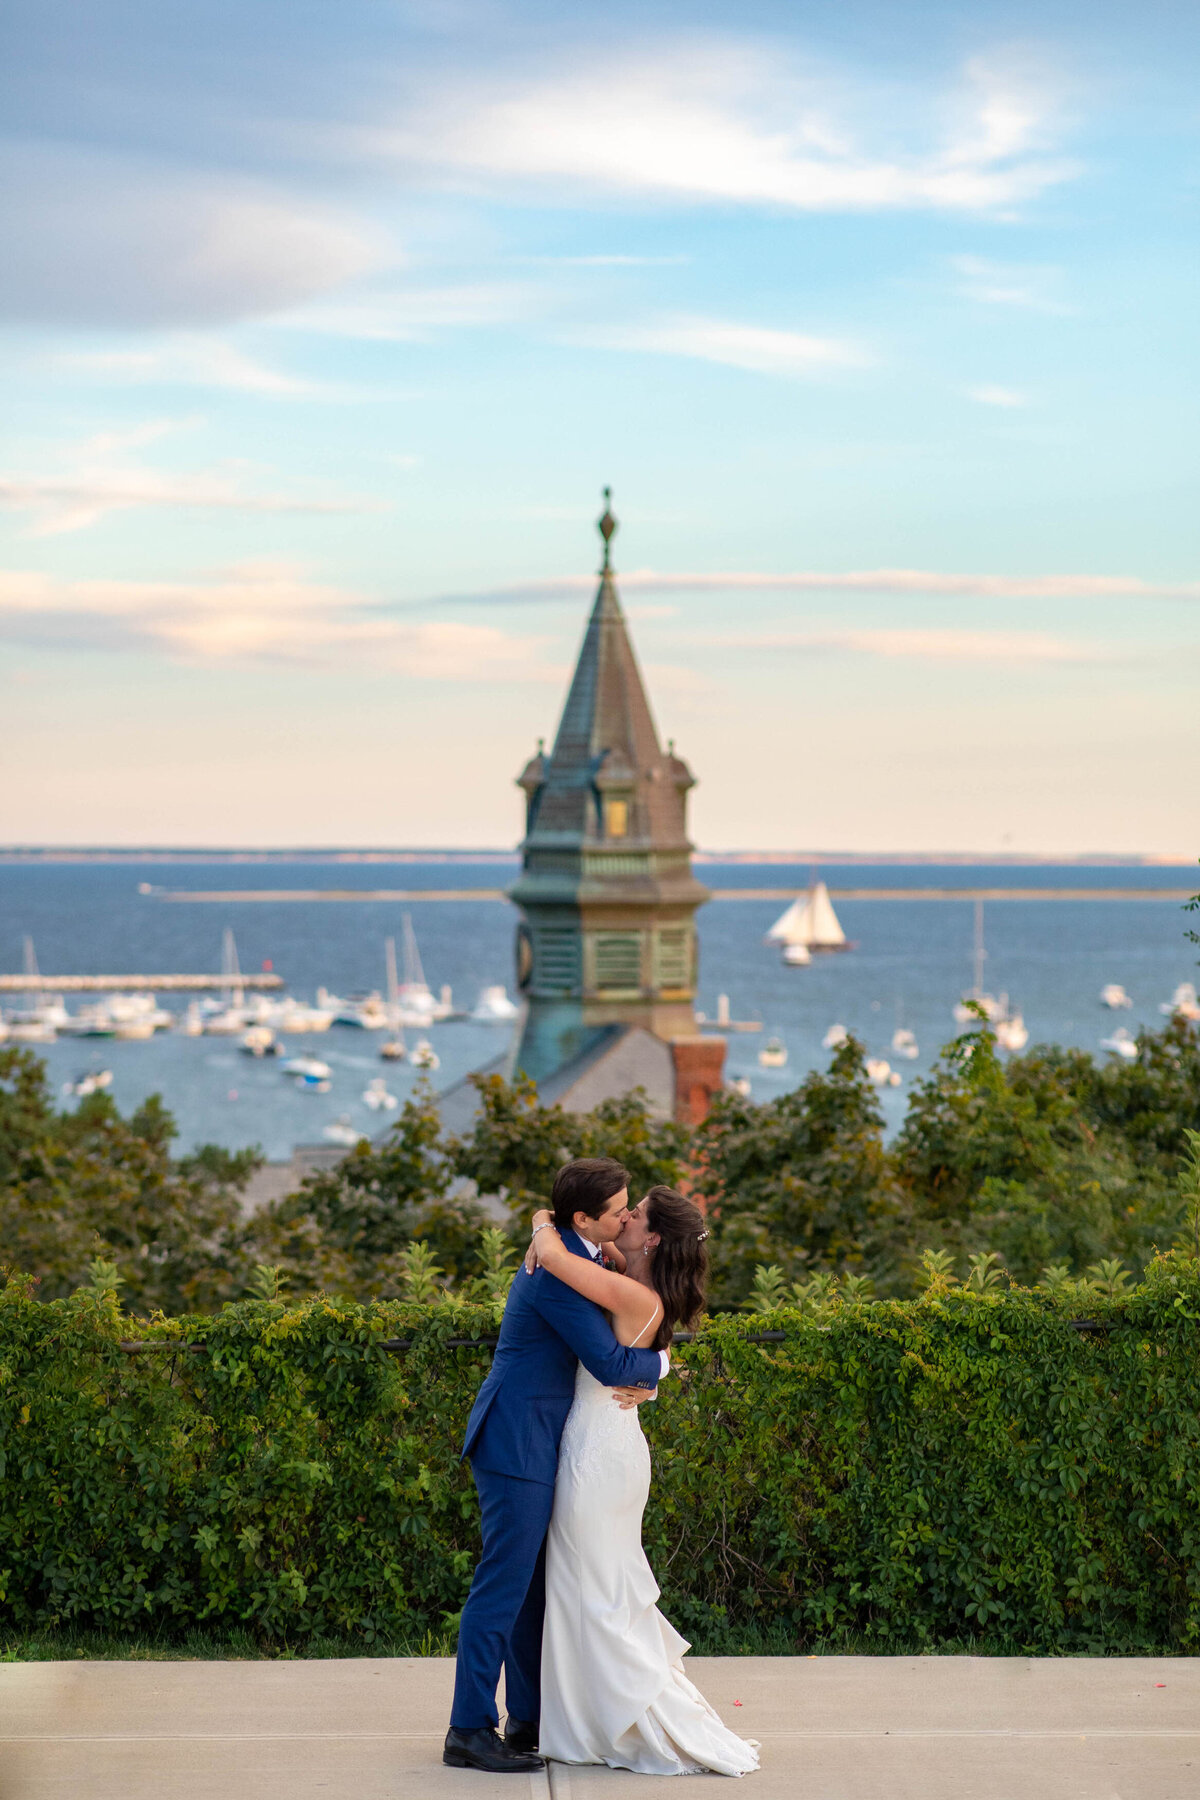 A couple kissing on an overlook looking out over boats on the water.